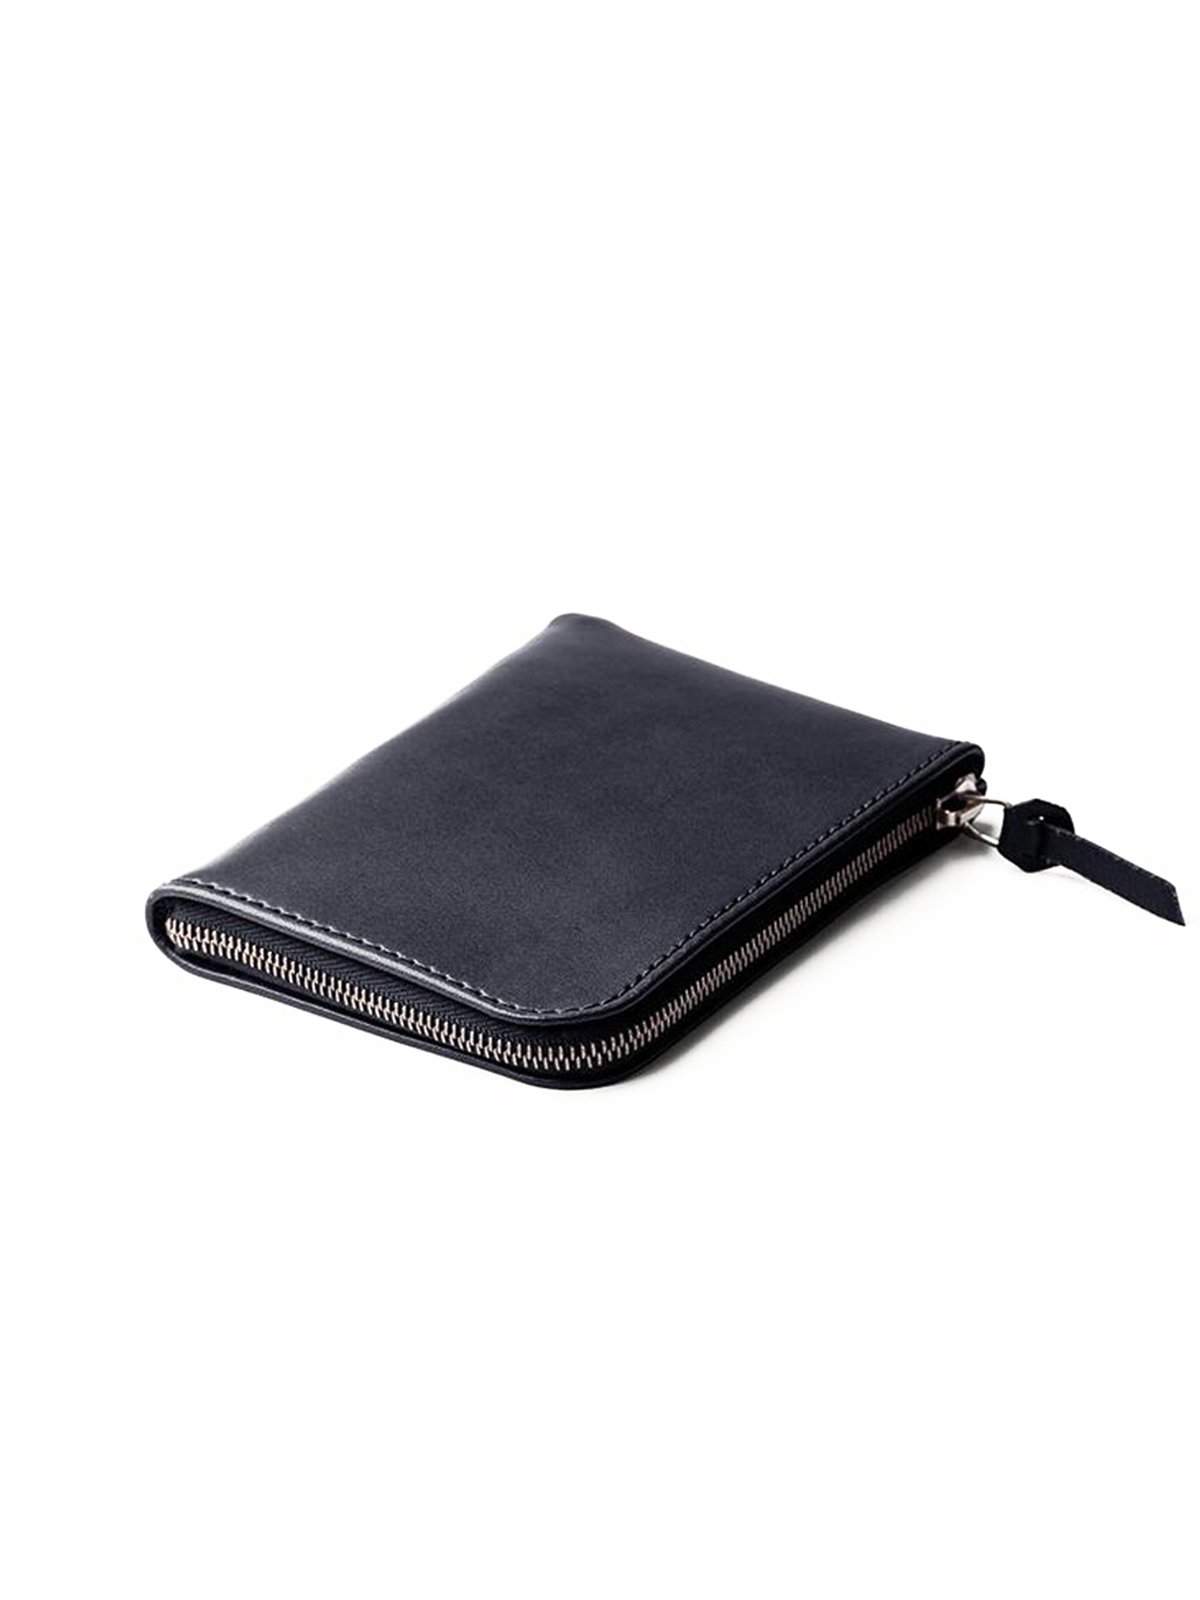 Tanner Goods Universal Zip Wallet Black - MORE by Morello Indonesia